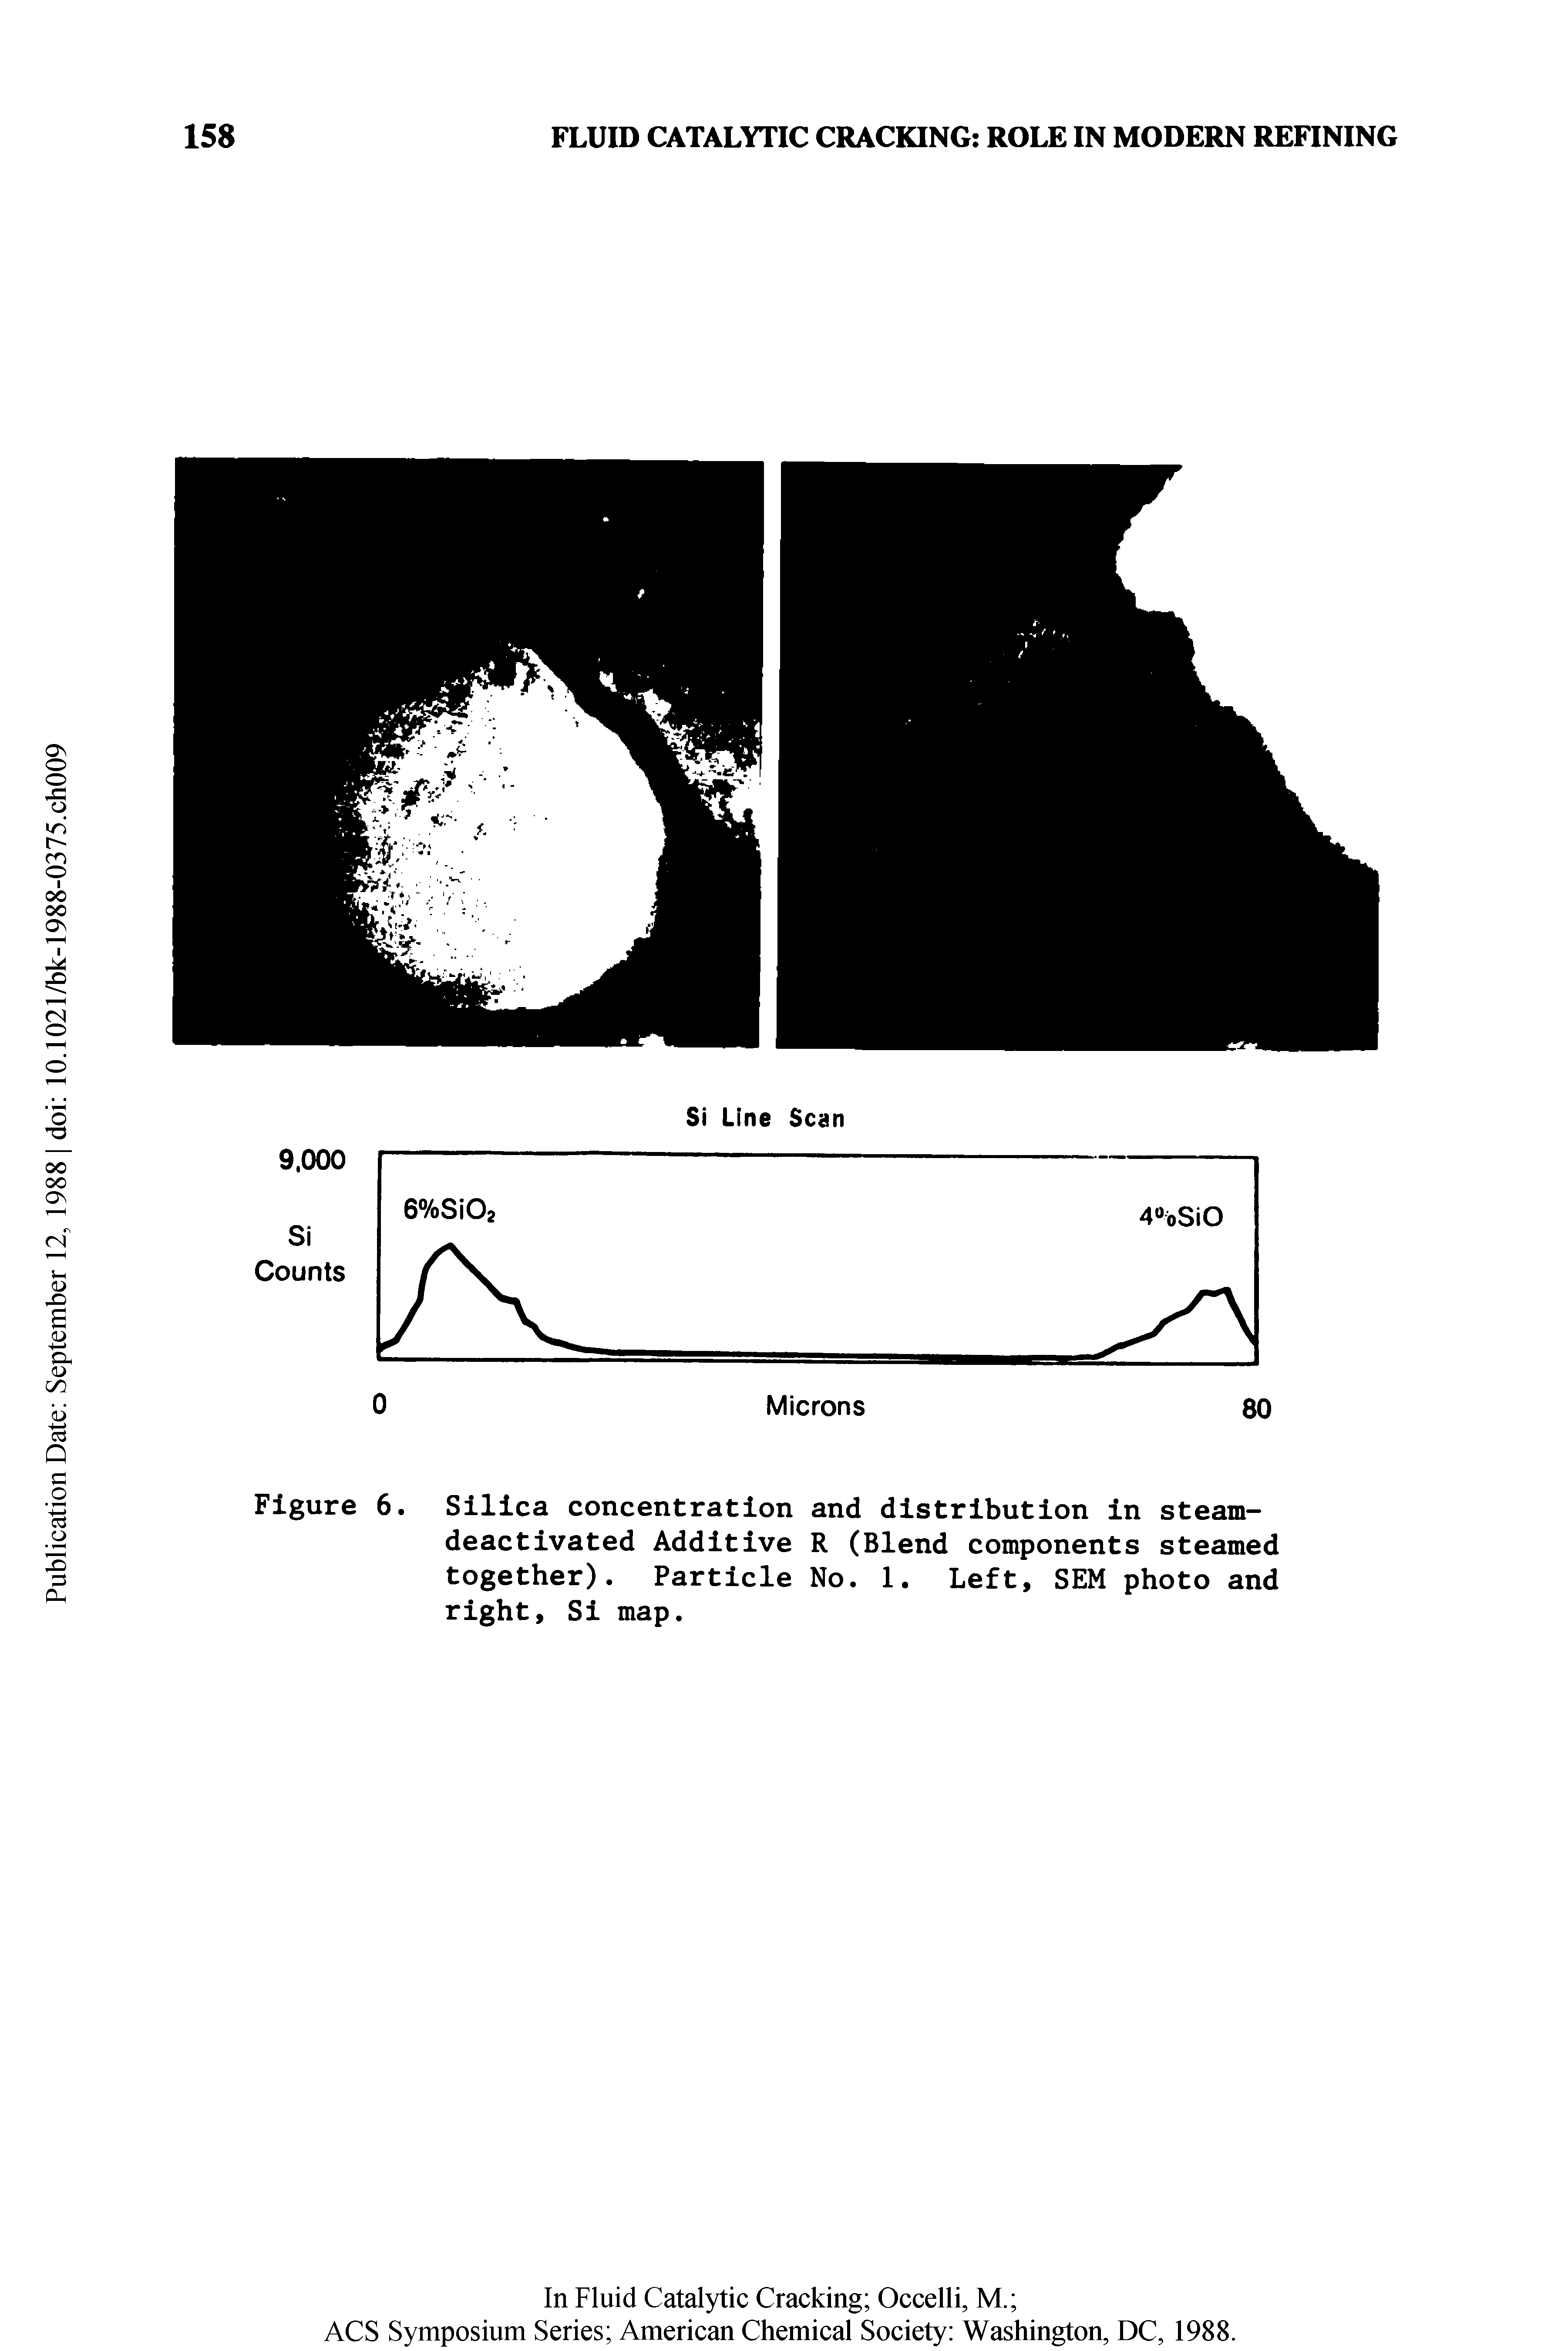 Figure 6. Silica concentration and distribution in steam-deactivated Additive R (Blend components steamed together). Particle No. 1. Left, SEM photo and right. Si map.